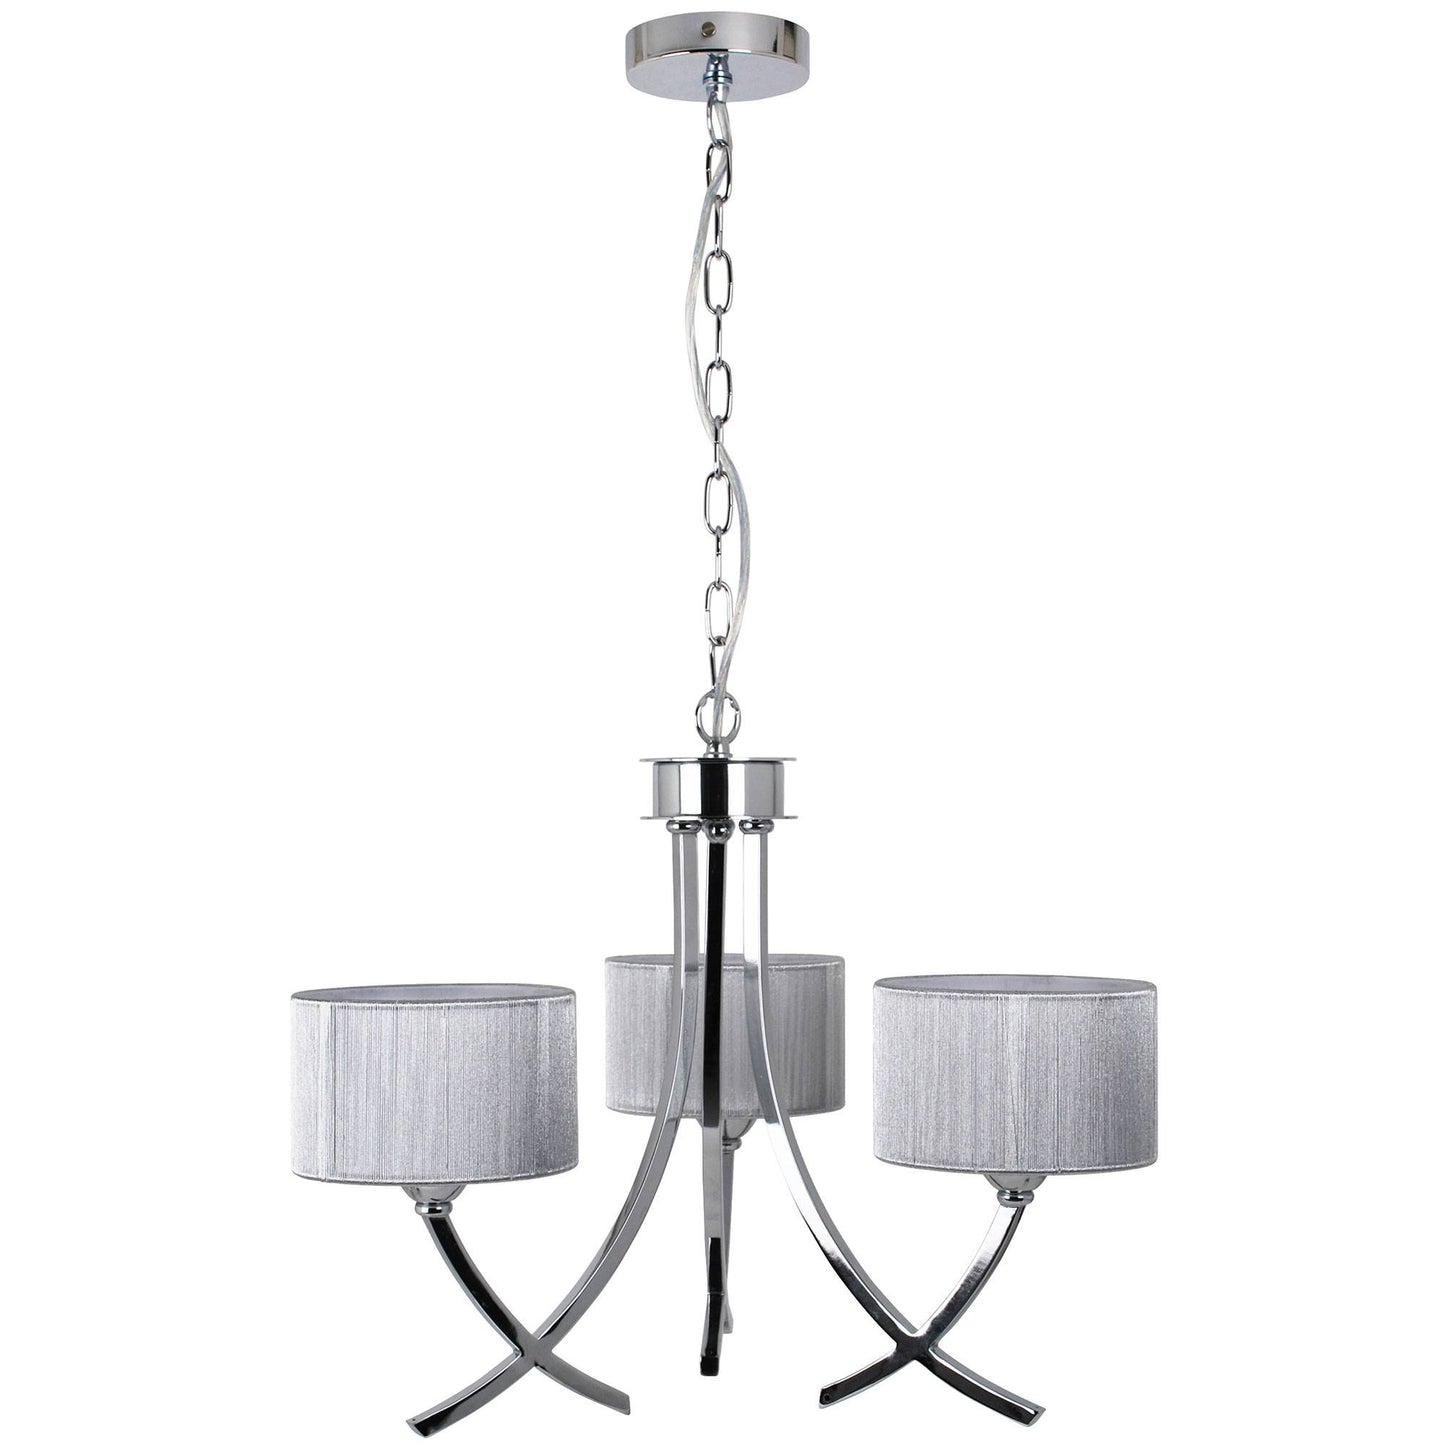 Justina 3 Light Polished Chrome Chandelier with Silver String Shade